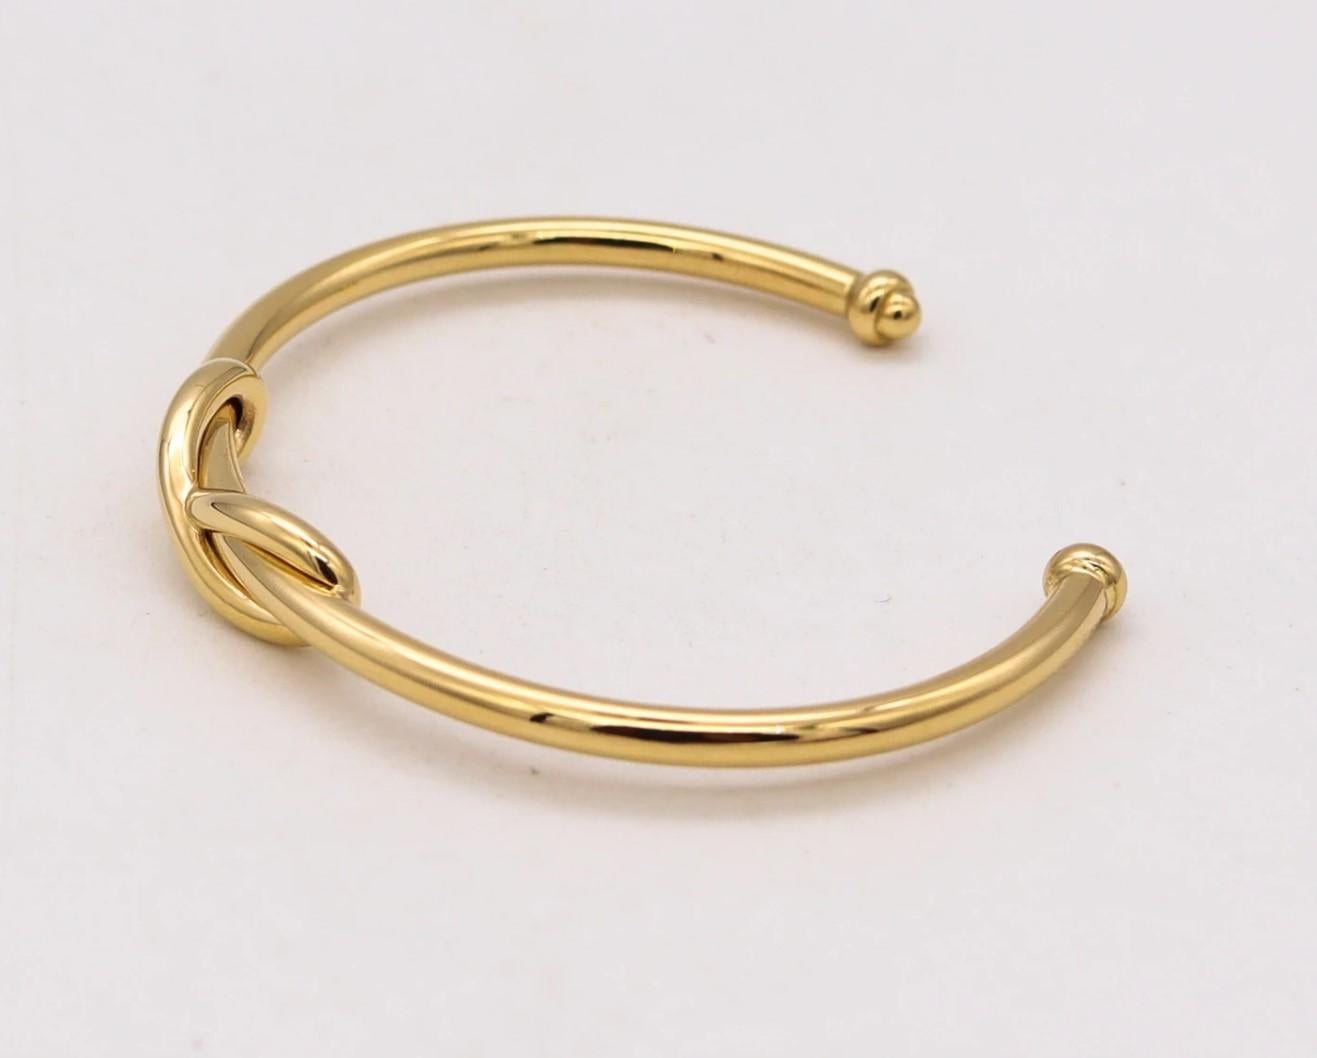 Infinity cuff bracelet designed by Tiffany & Co.

A popular piece, created by Tiffany in solid yellow gold of 18 karats, with high polished finish. The design depicts the infinity motif.

Has a total weight of 17.3 Grams and fit a wrist up to 6.25